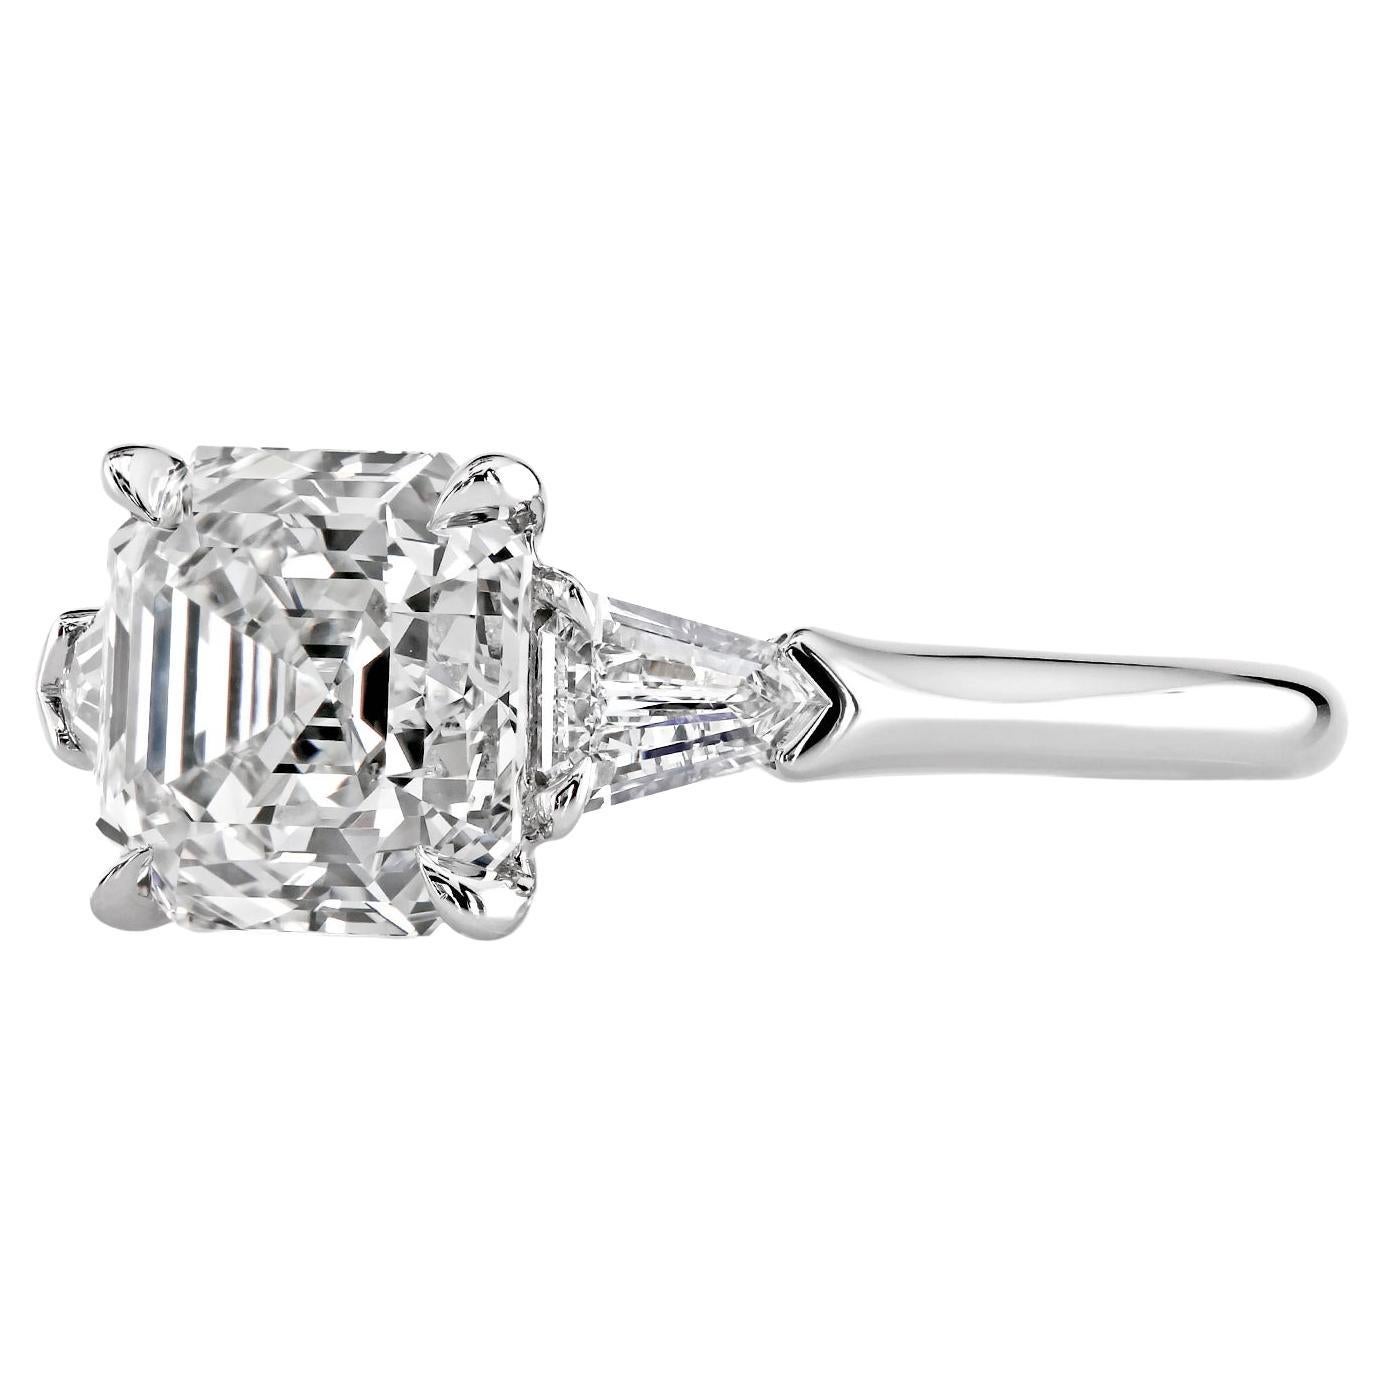 Leon Megé bespoke three-stone engagement ring unmatched by other pairings and featuring an Asscher-cut diamond of graceful beauty.

1.83 ct Asscher cut natural diamond
Elongated diamond bullets
Single claw prongs
Rolex-grade platinum

The lead time